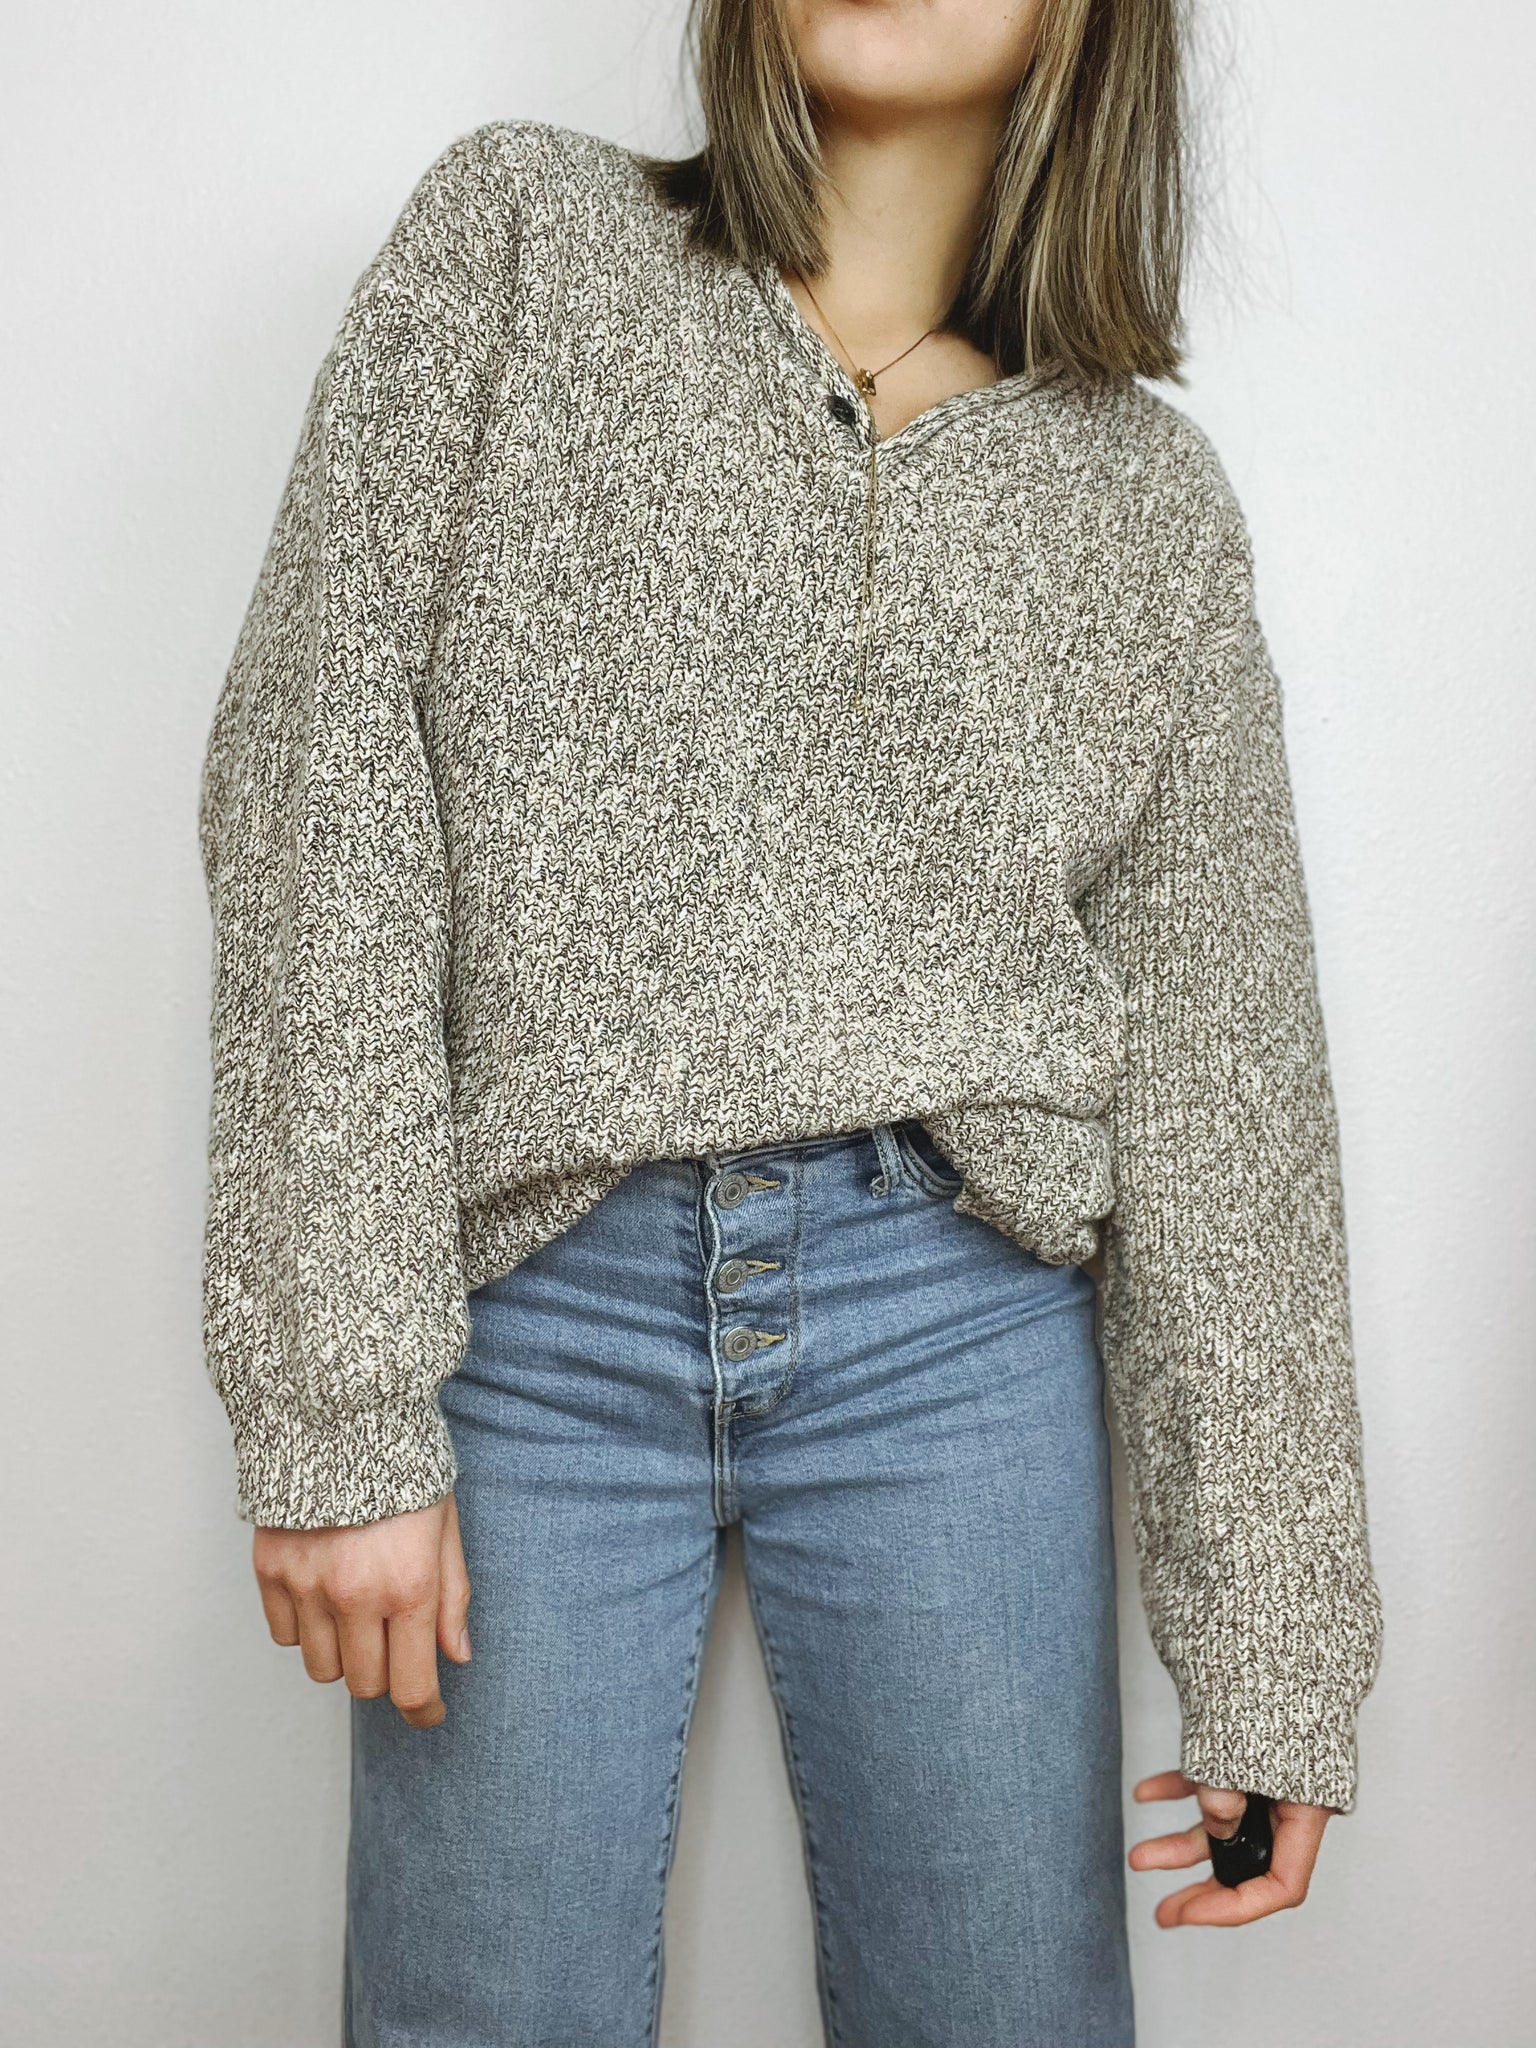 Heathered V-Neck 1-Button Sweater